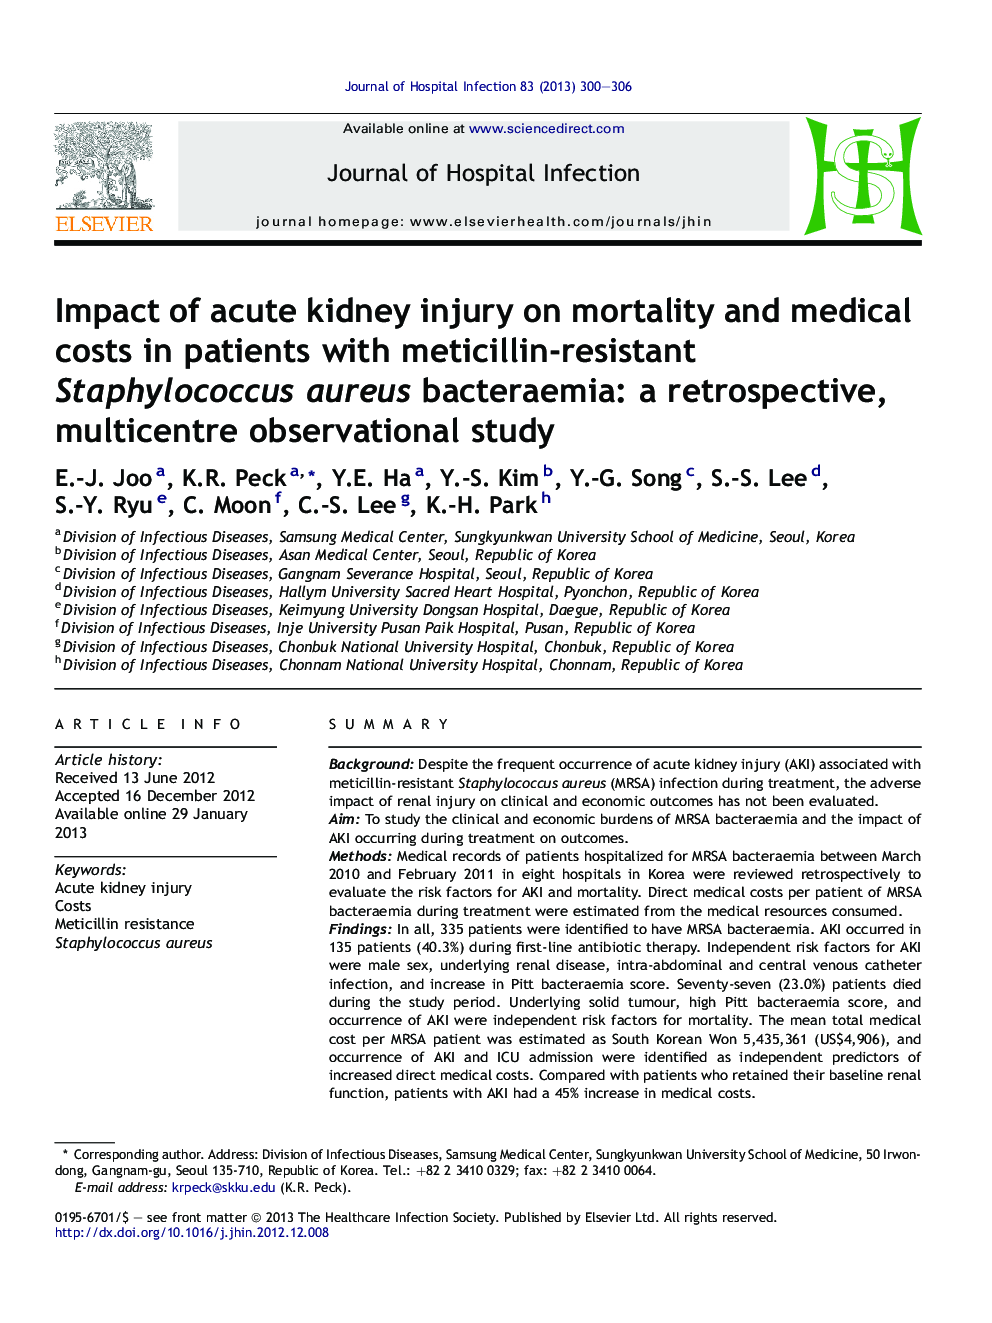 Impact of acute kidney injury on mortality and medical costs in patients with meticillin-resistant Staphylococcus aureus bacteraemia: a retrospective, multicentre observational study